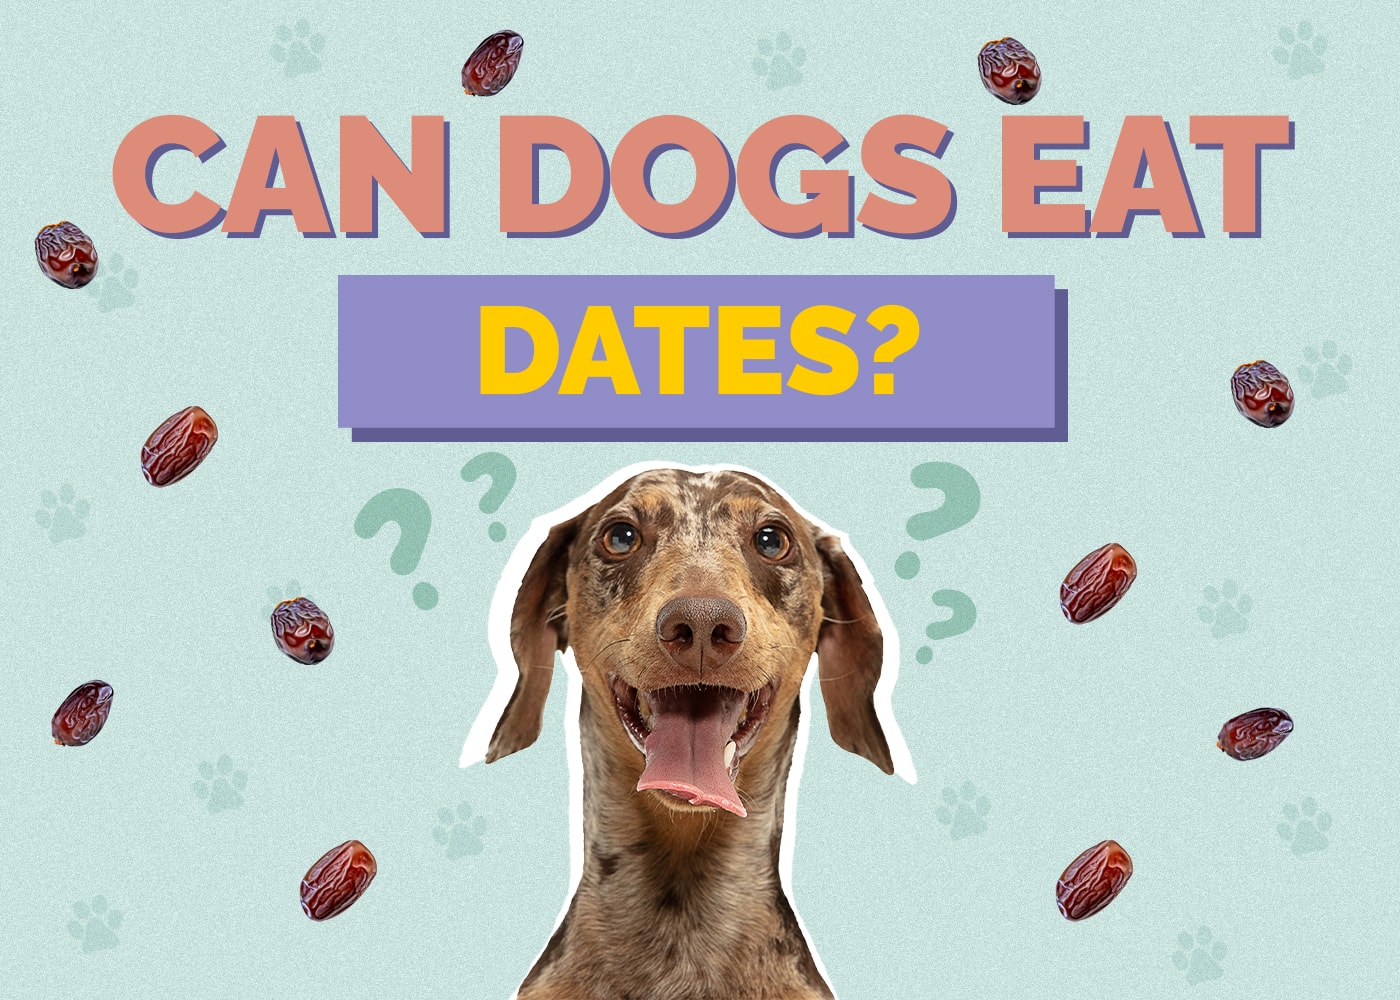 Can Dog Eat dates